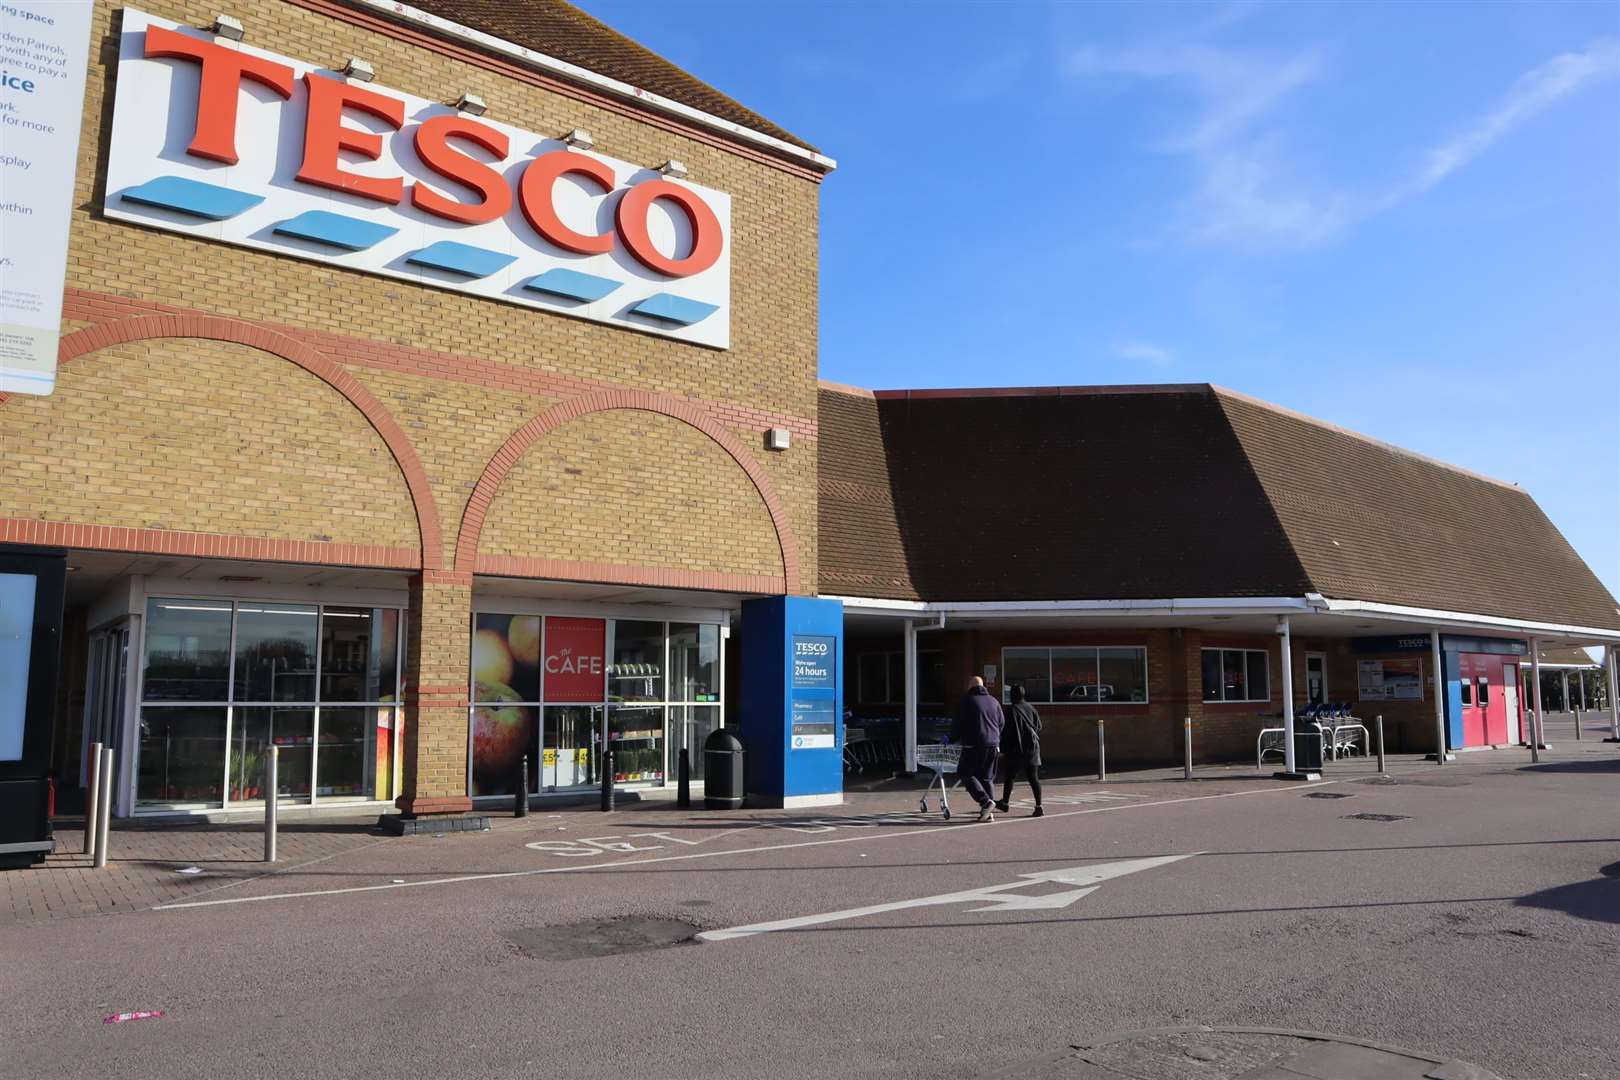 Tesco says 100 stores will have the new section before Christmas. Image: Stock photo.